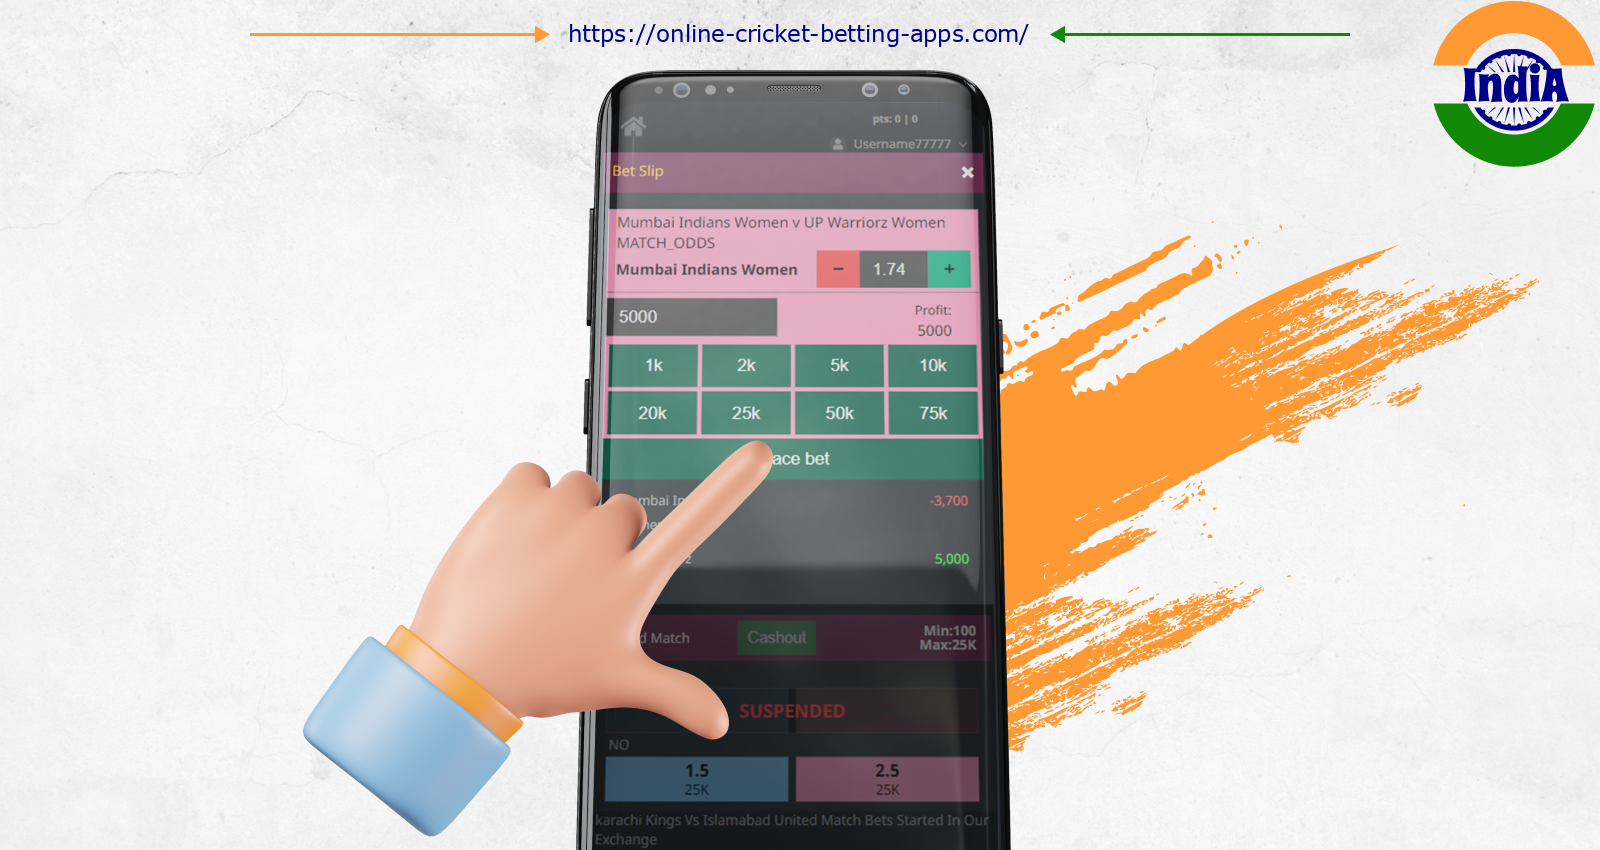 To play for real money, Indian bettors must place a bet on the selected match